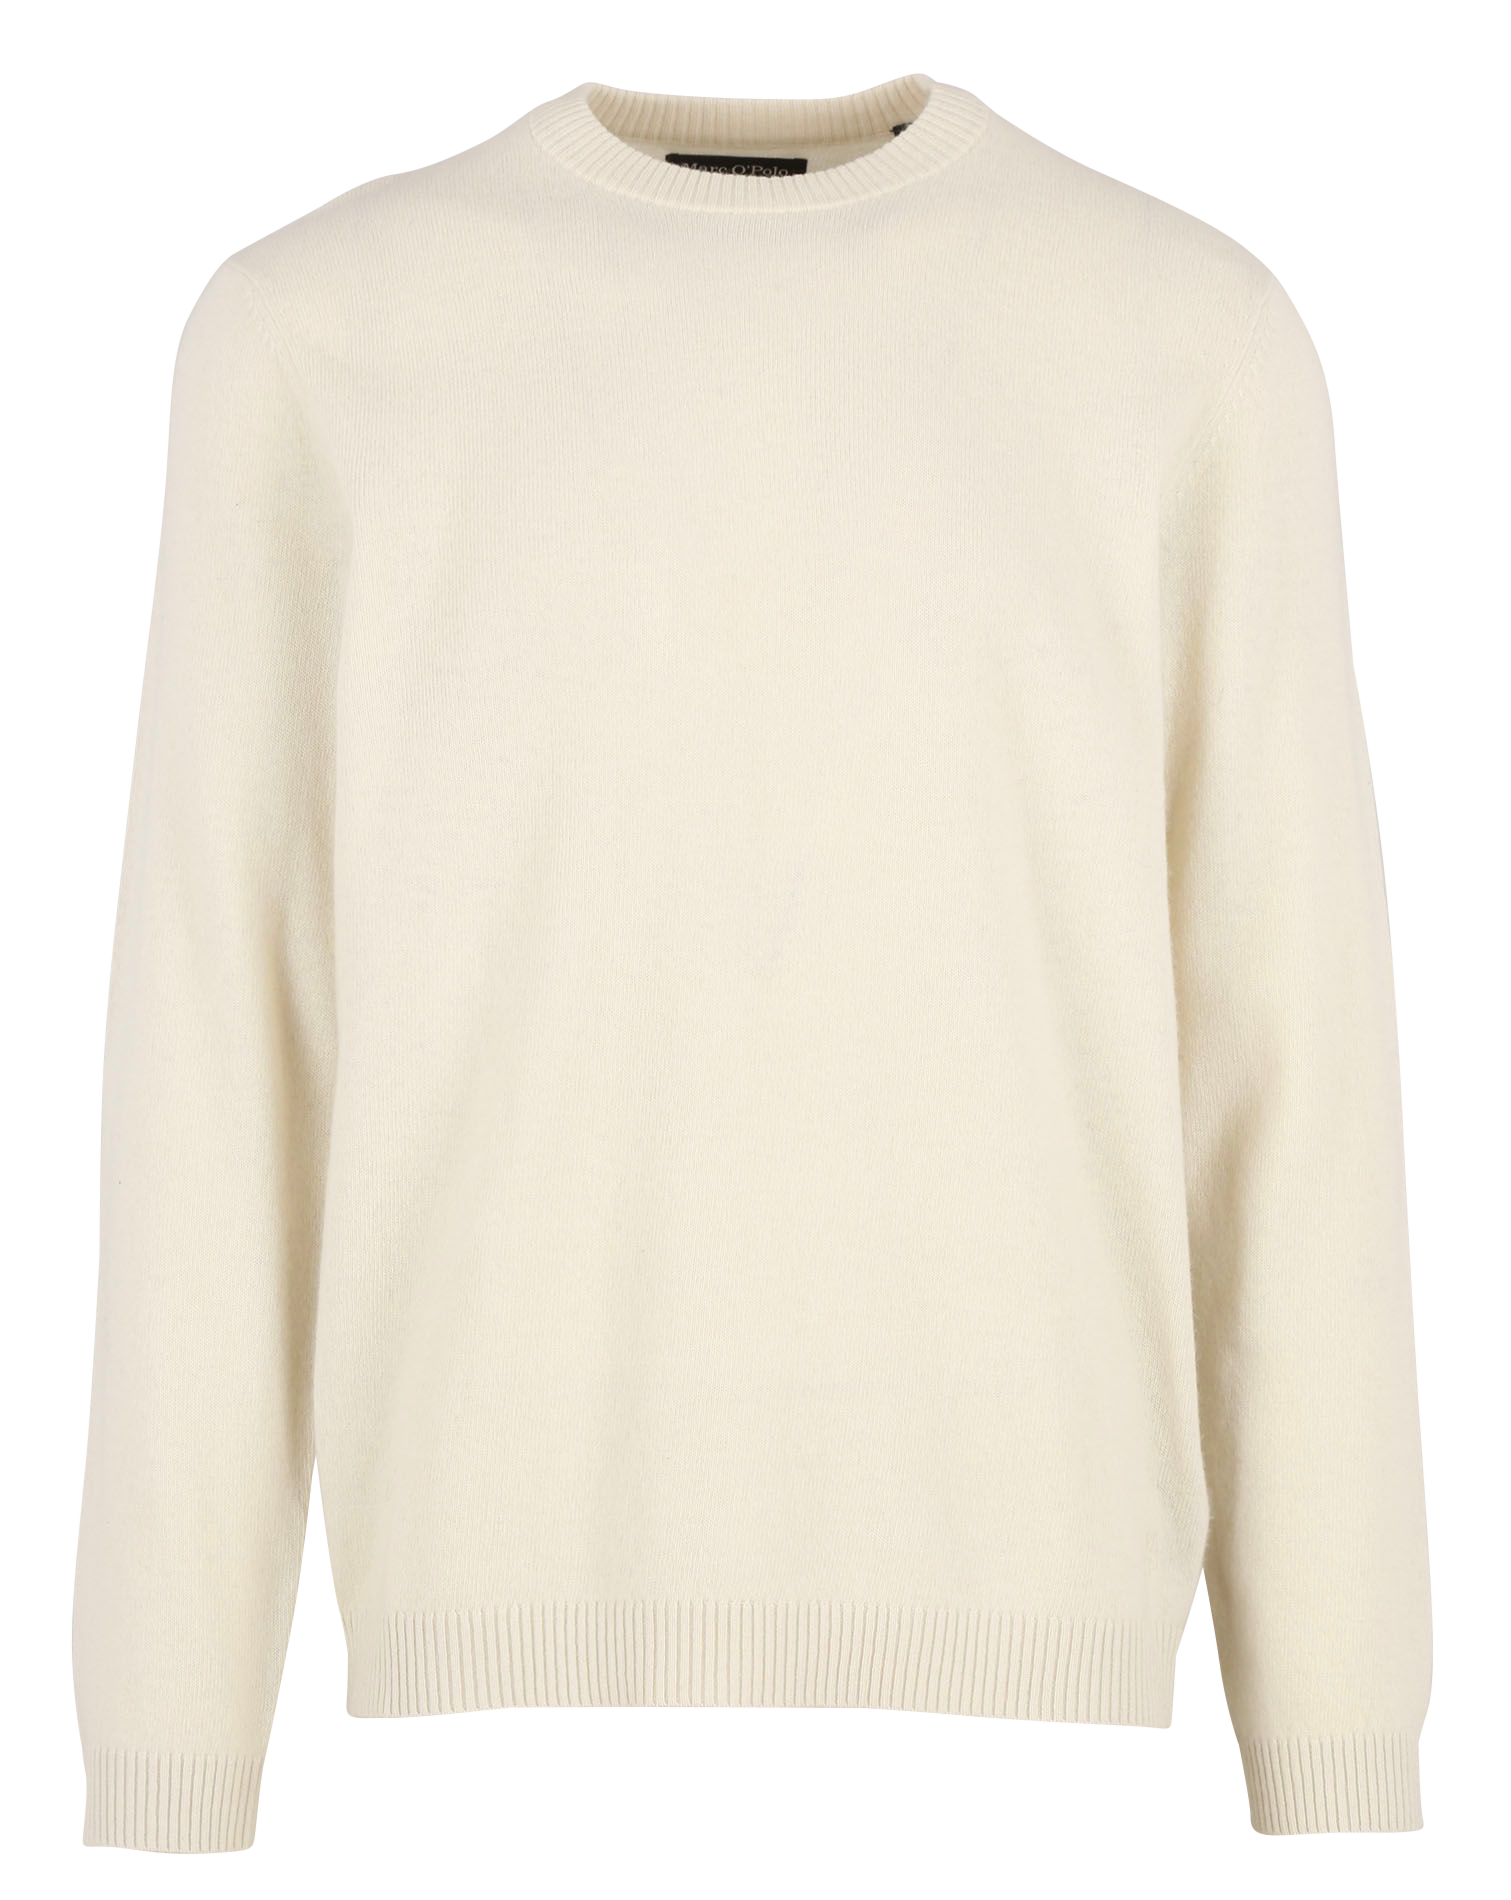 Marc O\u2019Polo Feinstrickpullover groen casual uitstraling Mode Sweaters Marc O’Polo 